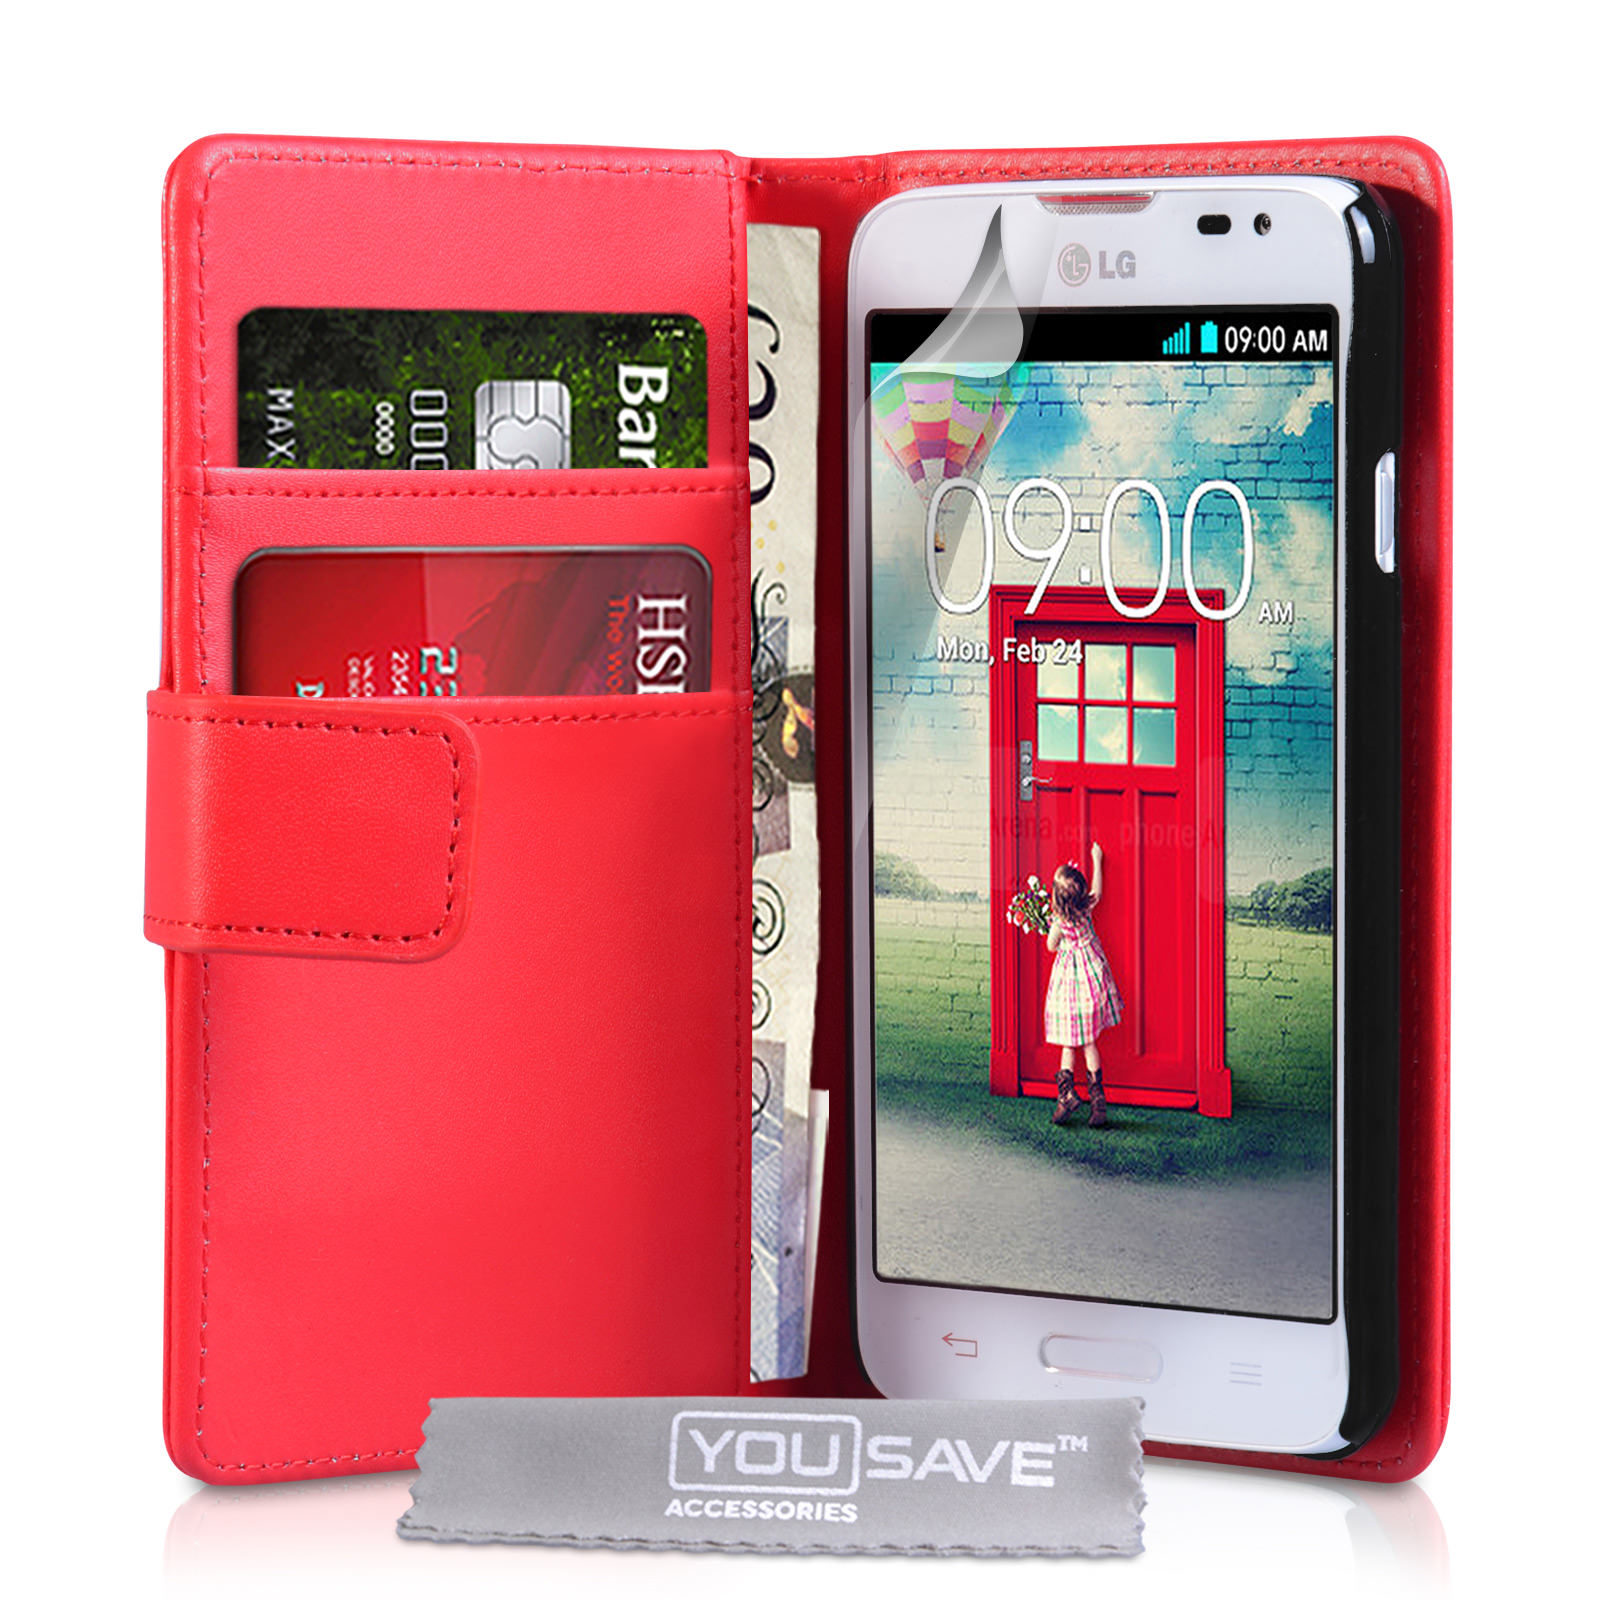 YouSave Accessories LG L70 Leather-Effect Wallet Case - Red